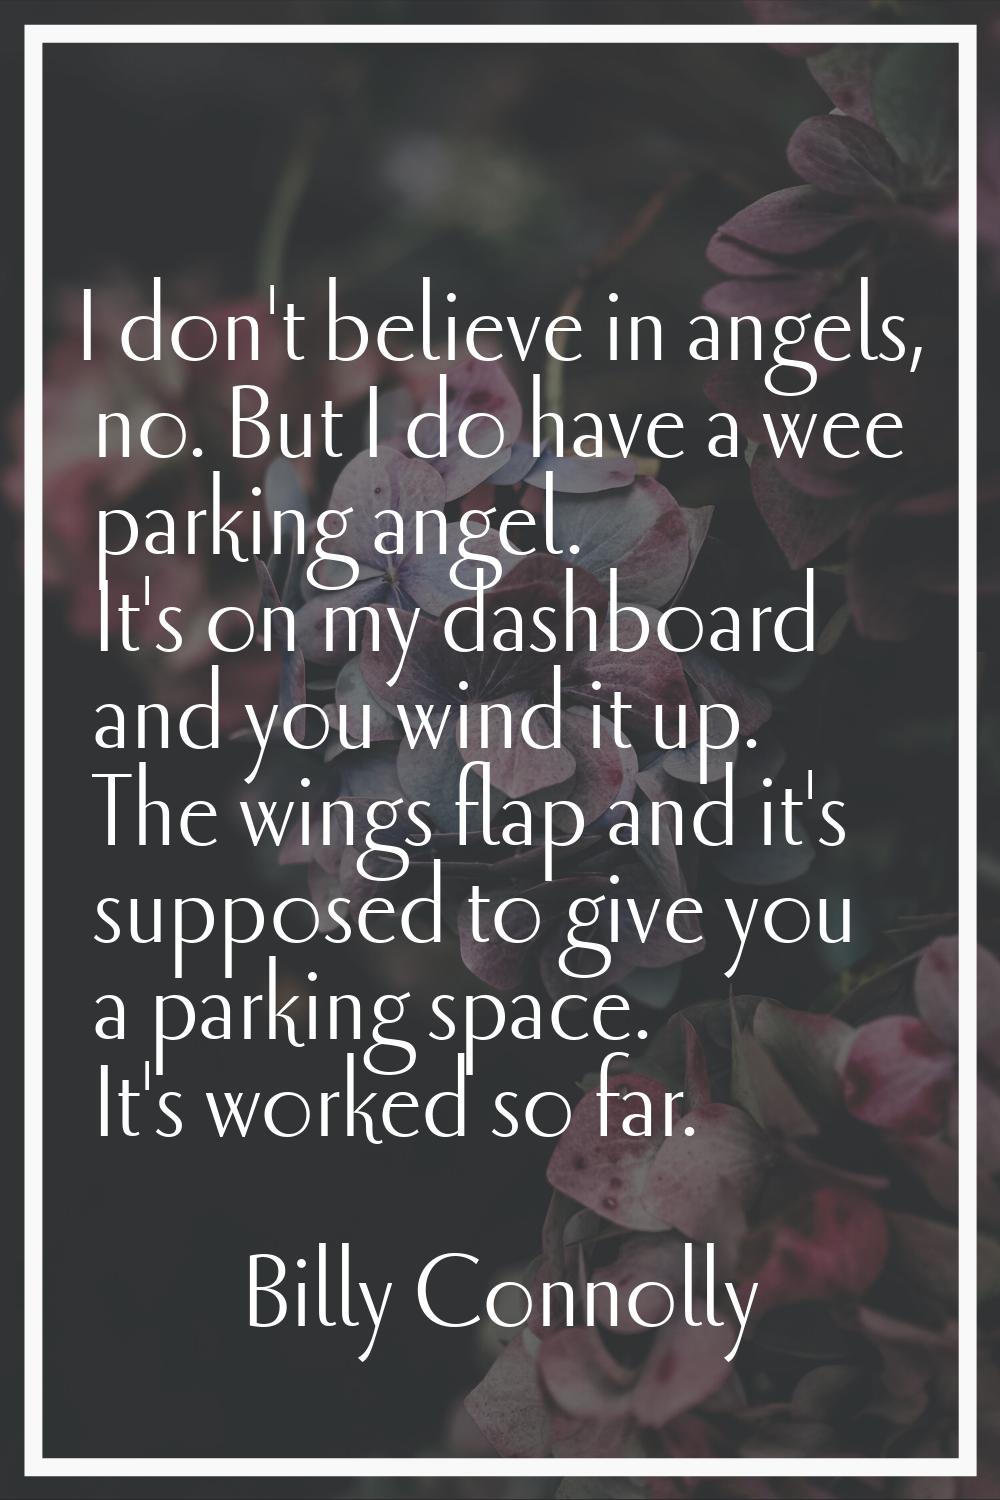 I don't believe in angels, no. But I do have a wee parking angel. It's on my dashboard and you wind